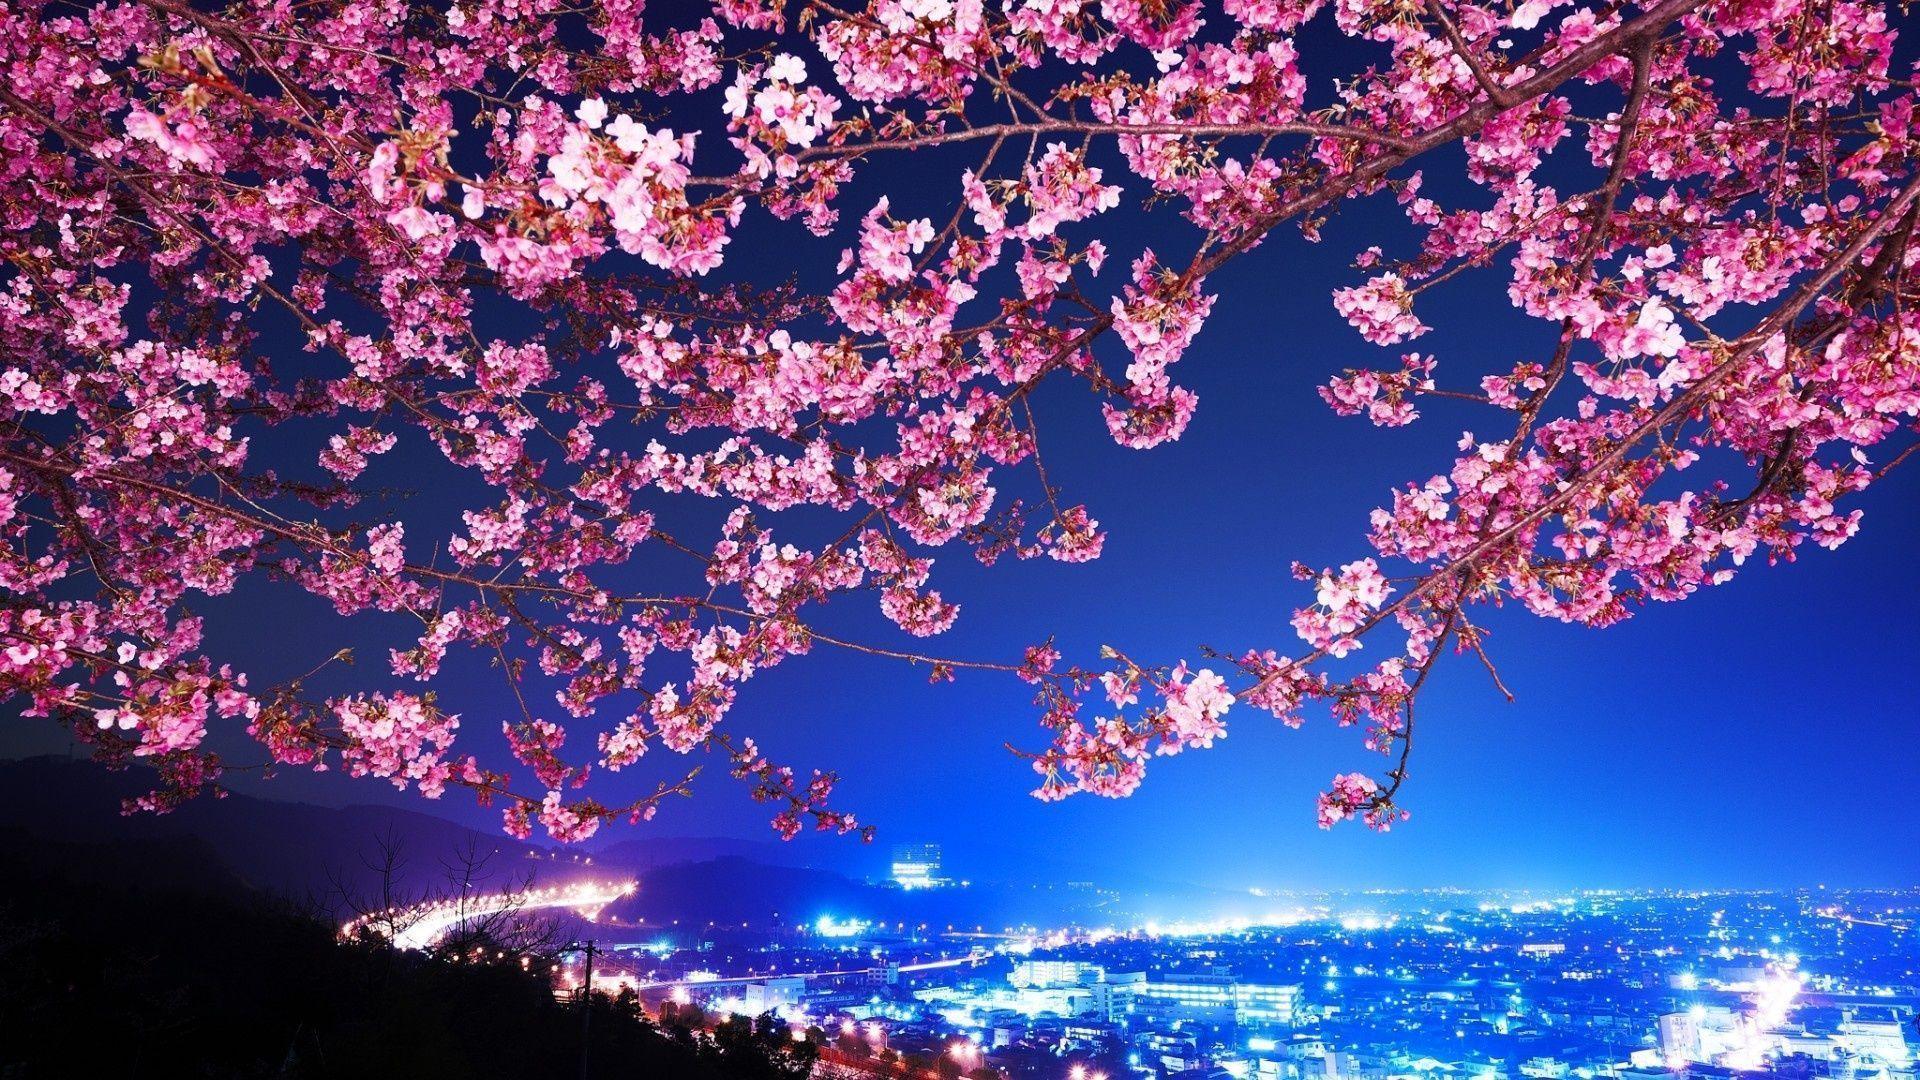 Hd Wallpaper Tags Cherry Blossom Tree With Path And Building